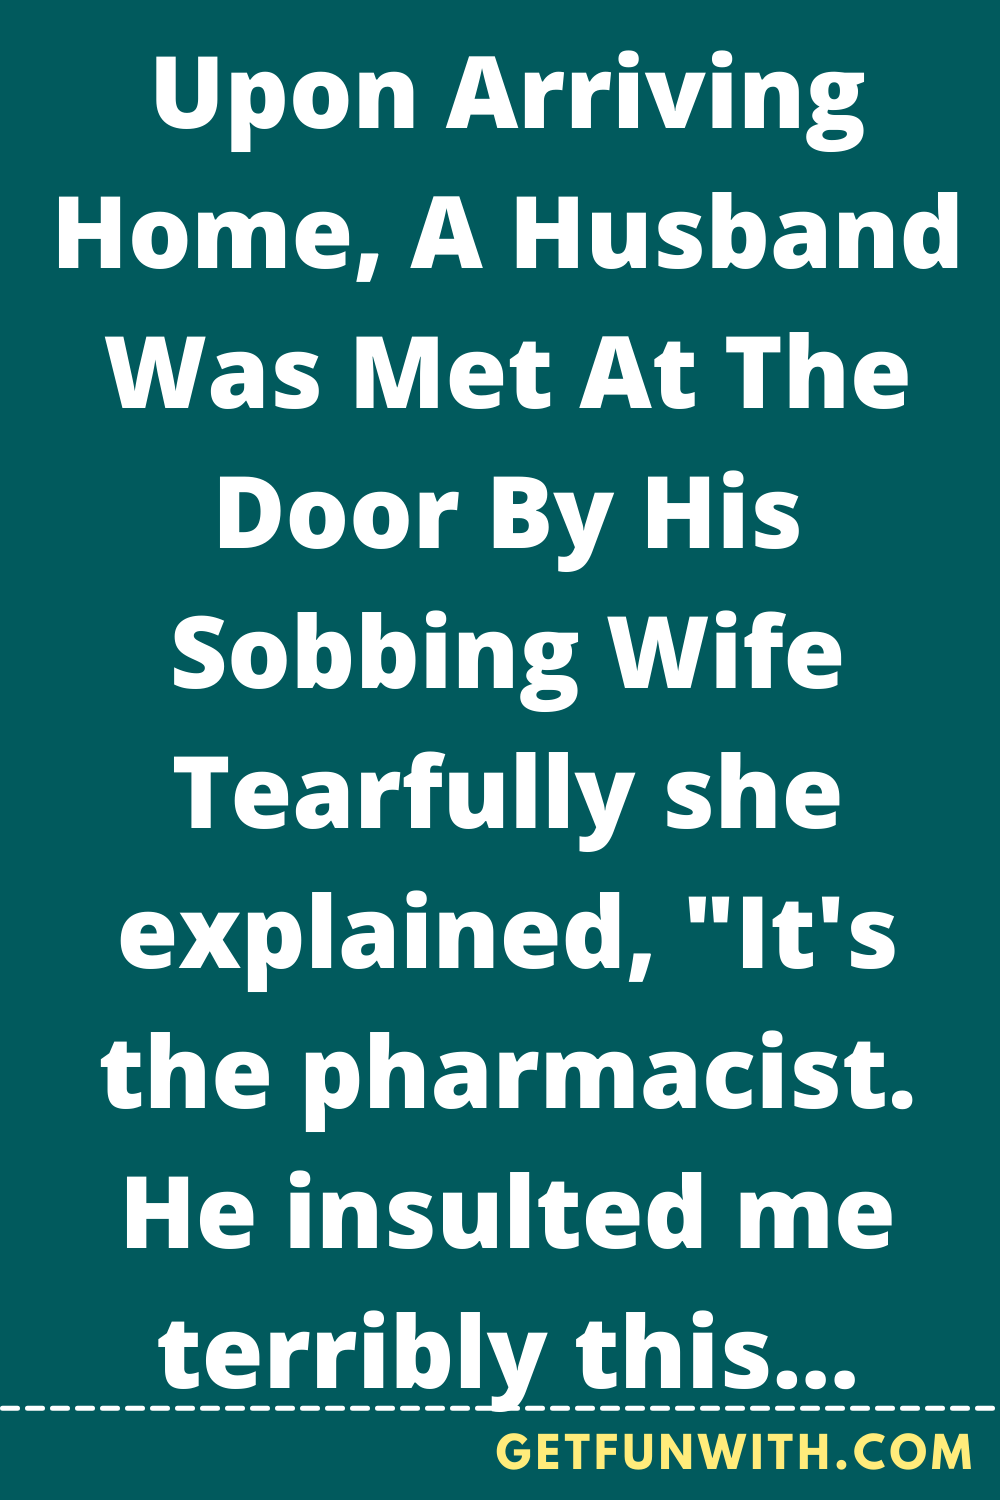 Upon Arriving Home, A Husband Was Met At The Door By His Sobbing Wife Tearfully she explained, "It's the pharmacist. He insulted me terribly this morning on the phone."